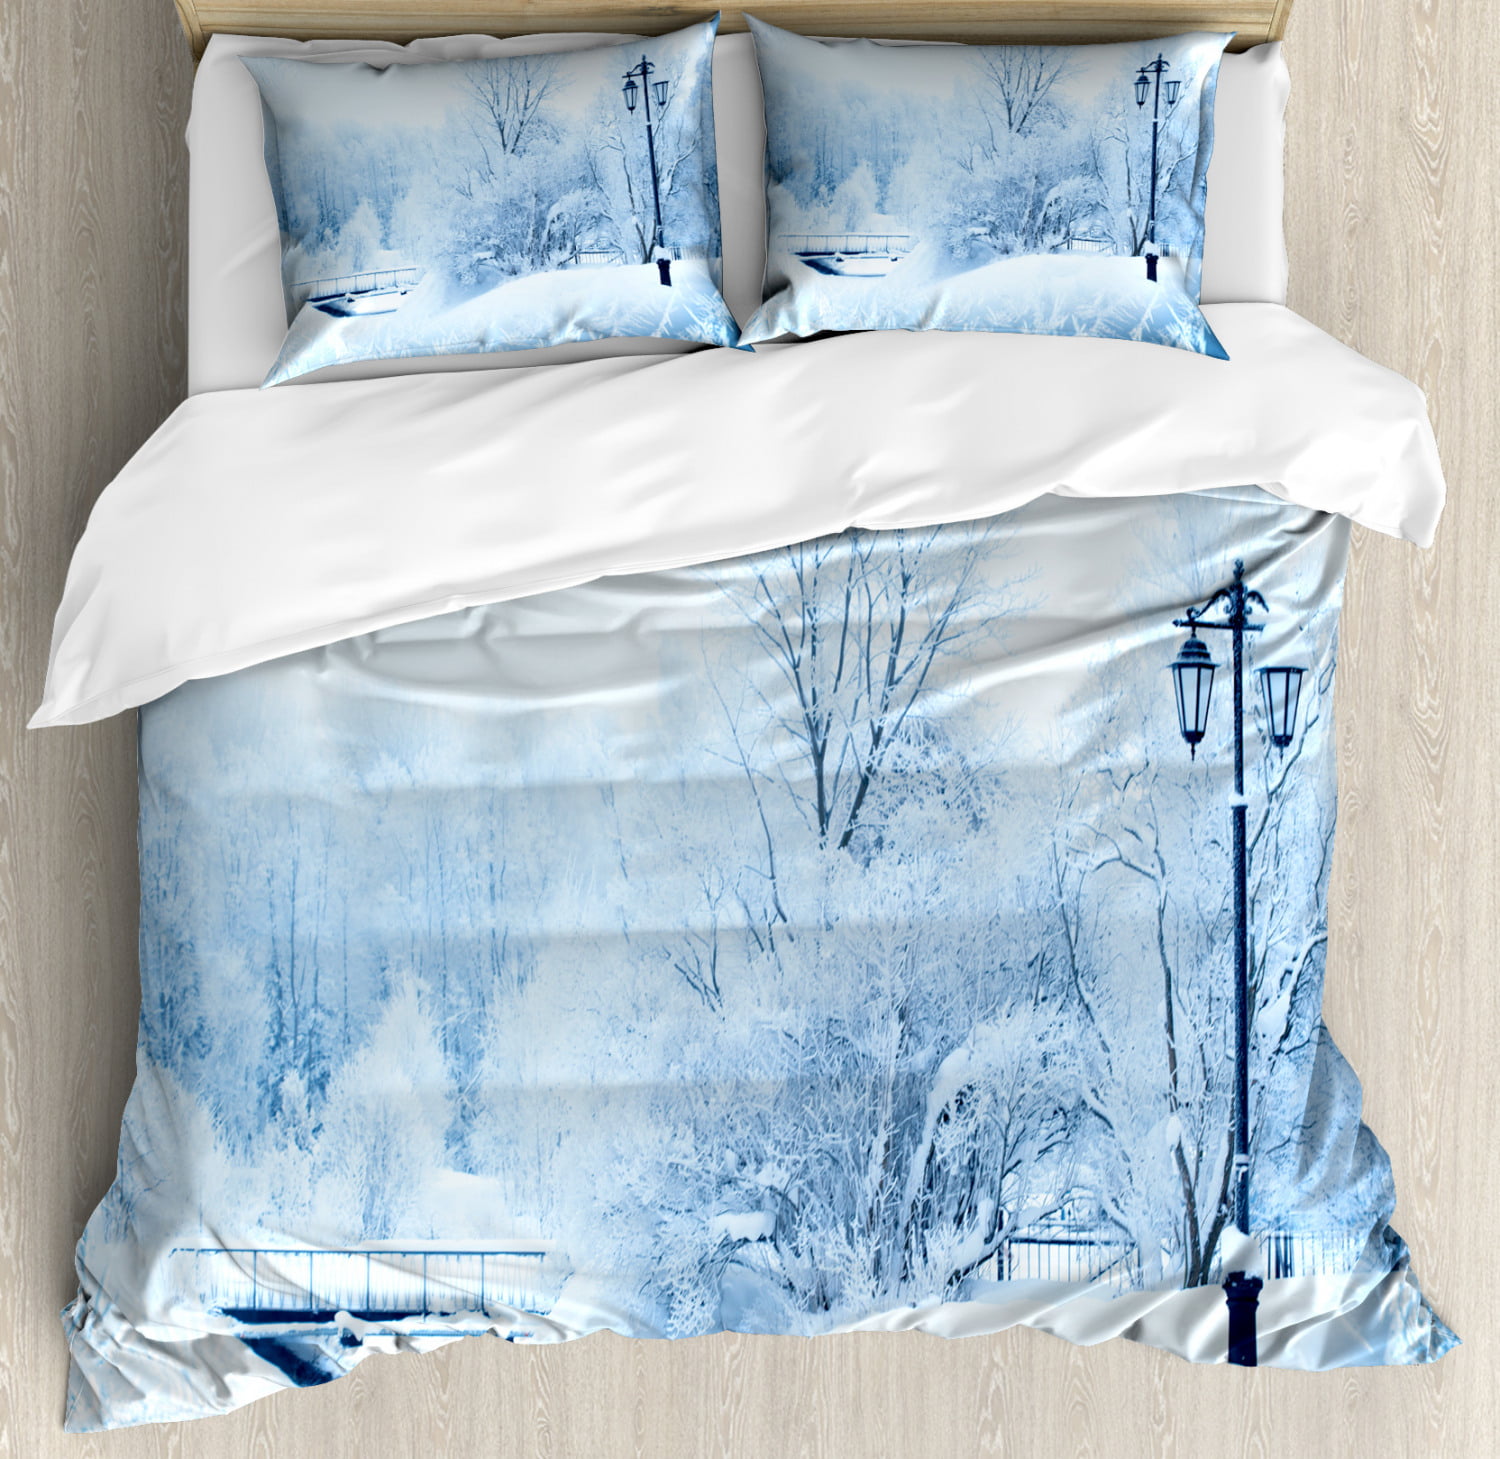 Winter Duvet Cover Set, Winter Trees in Wonderland Theme Christmas New Year Scenery Freezing Icy